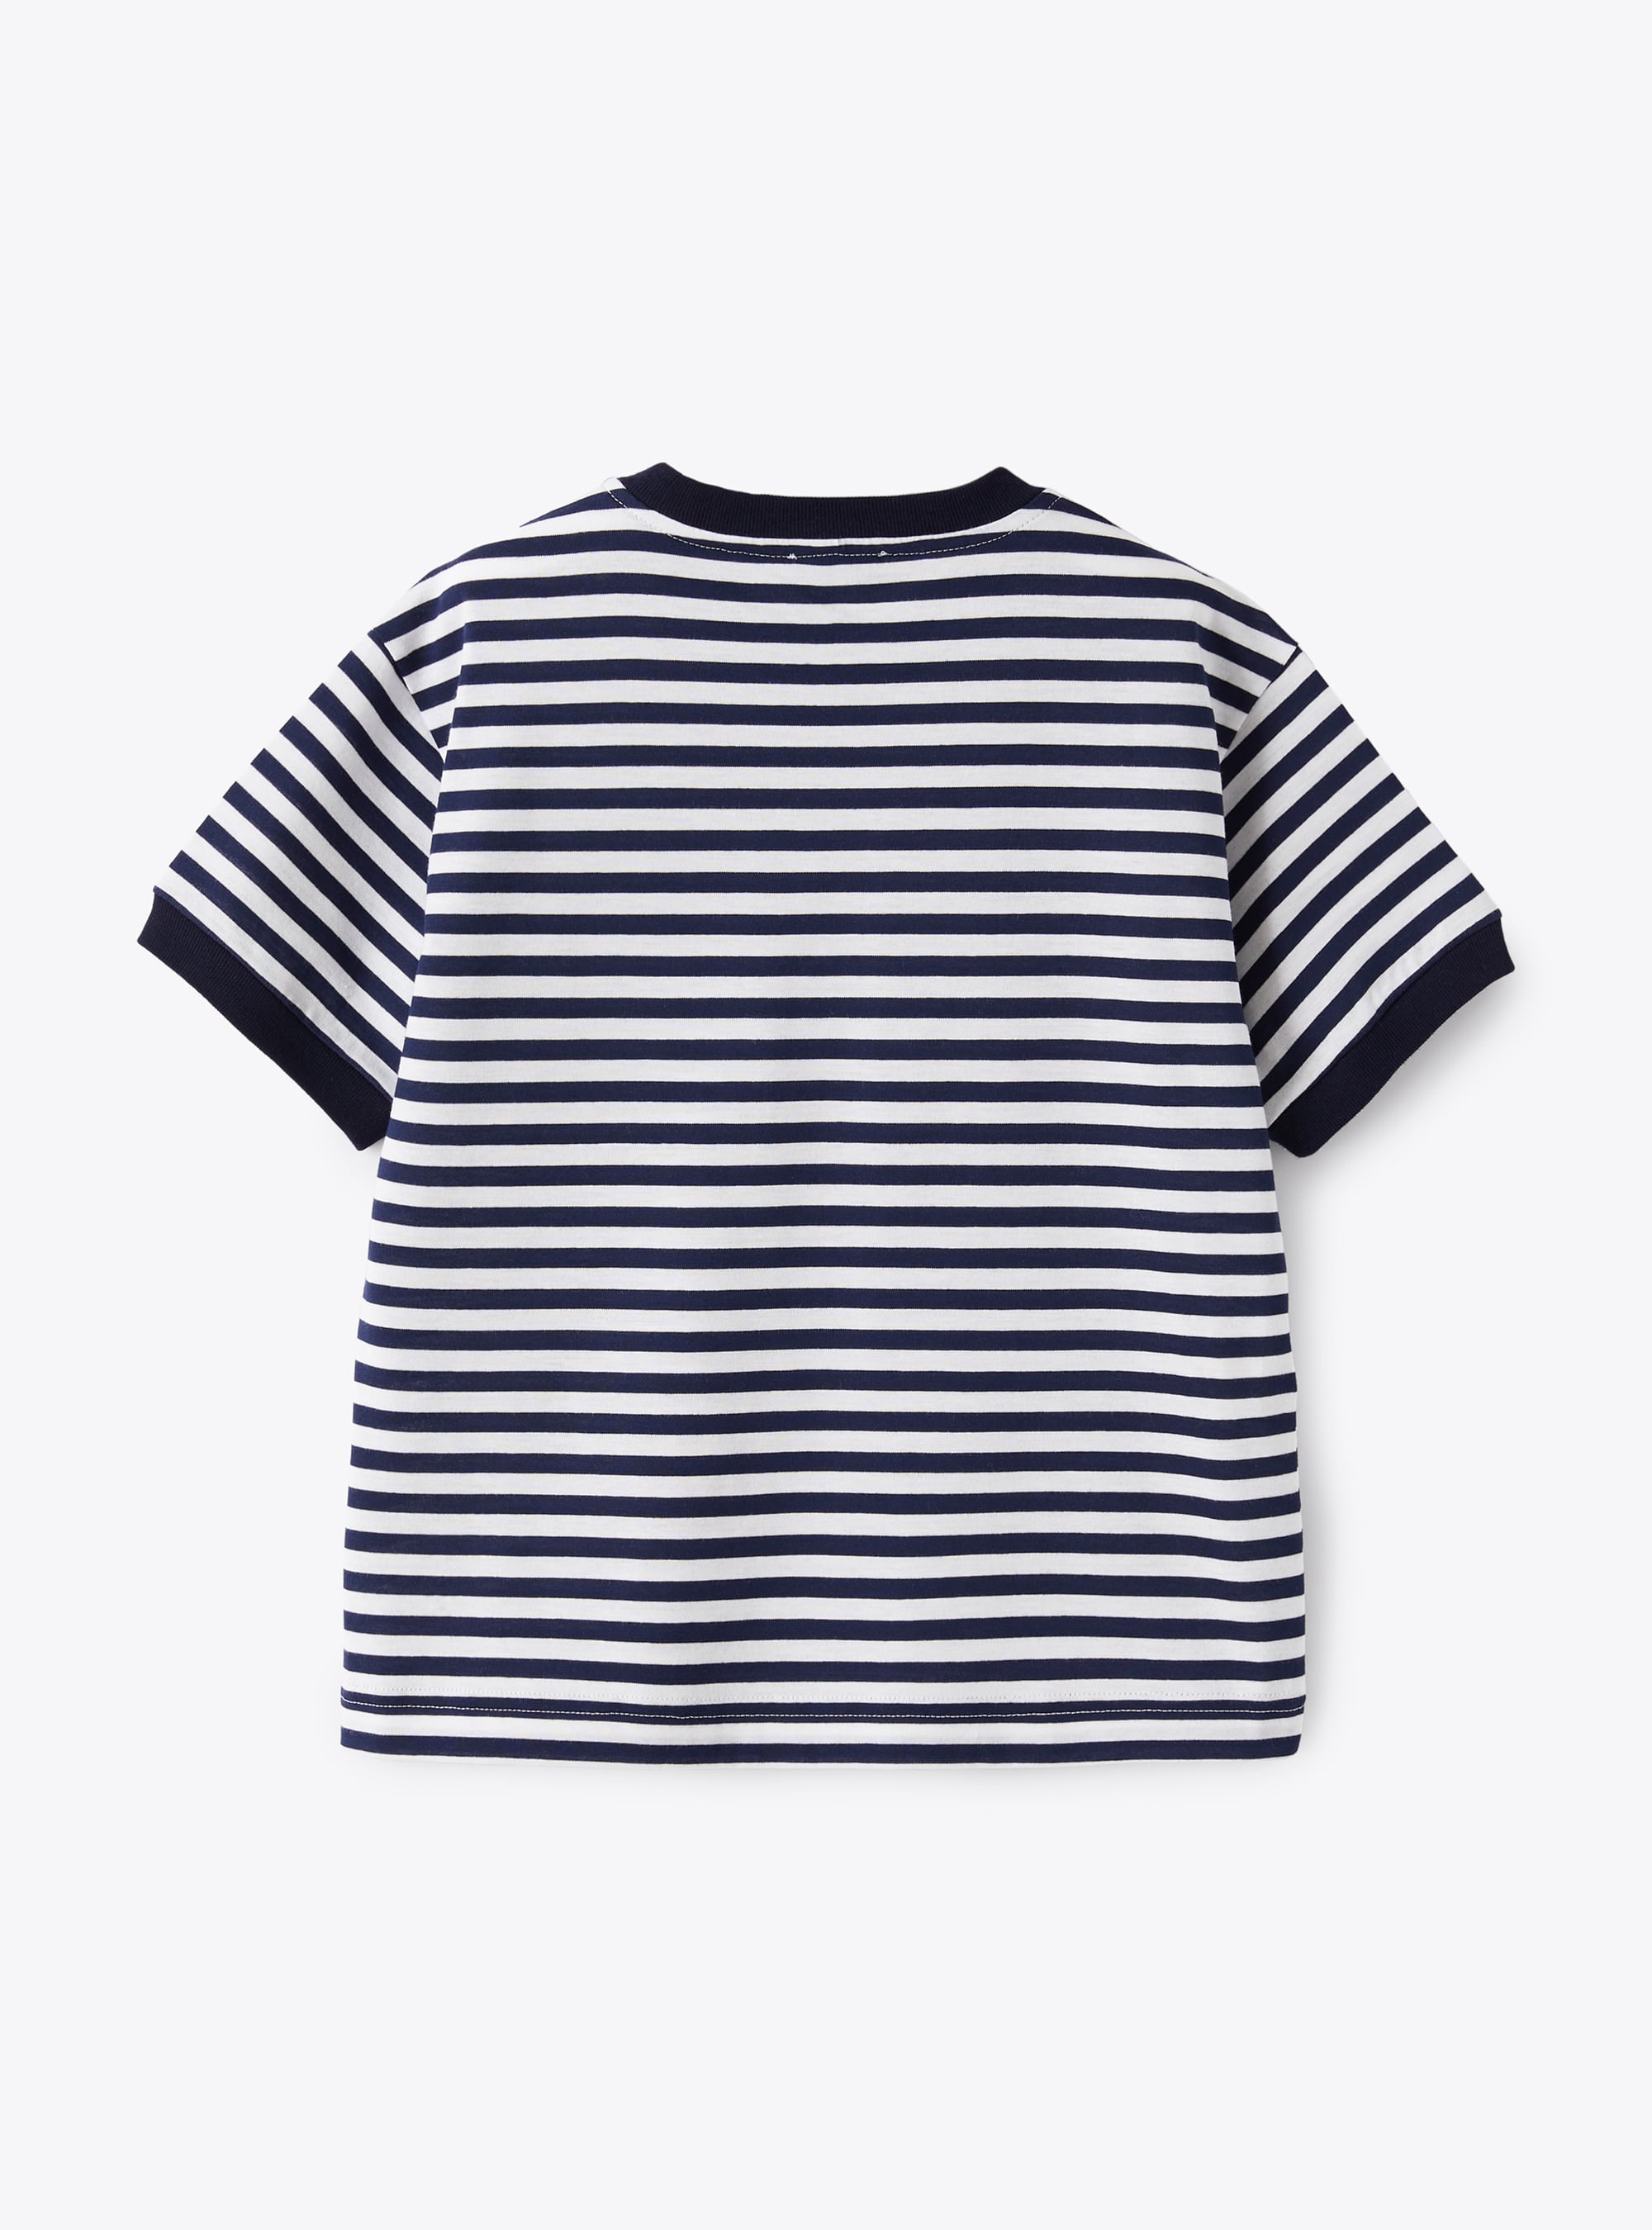 Striped T-shirt with red detail - Blue | Il Gufo